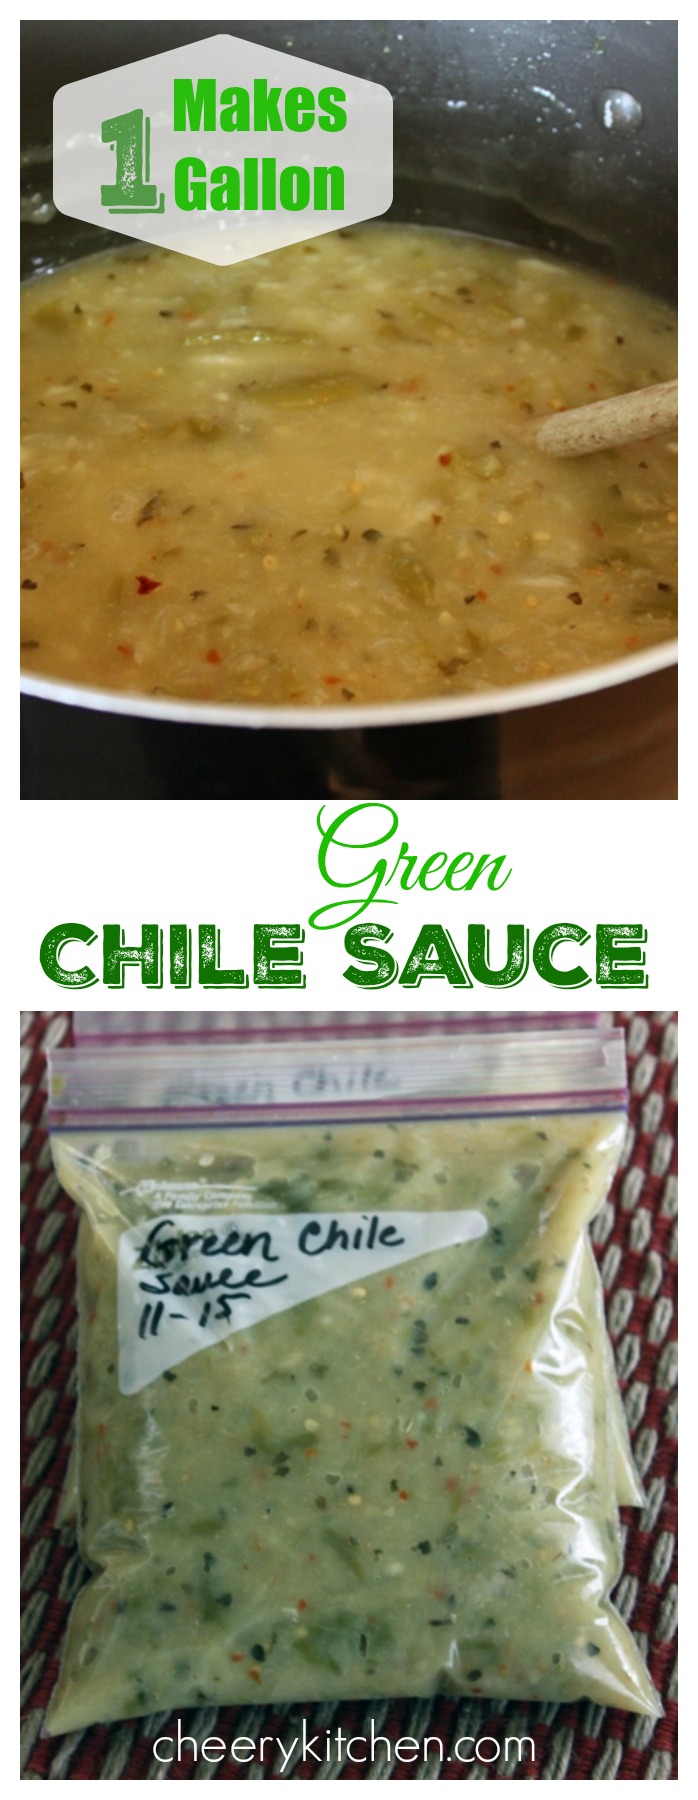 You'll sleep better with a stash of tasty freezable Favorite Green Chile Sauce. Thaw some and smother burritos, enchiladas, scrambled eggs, all your Mexican specialties! 